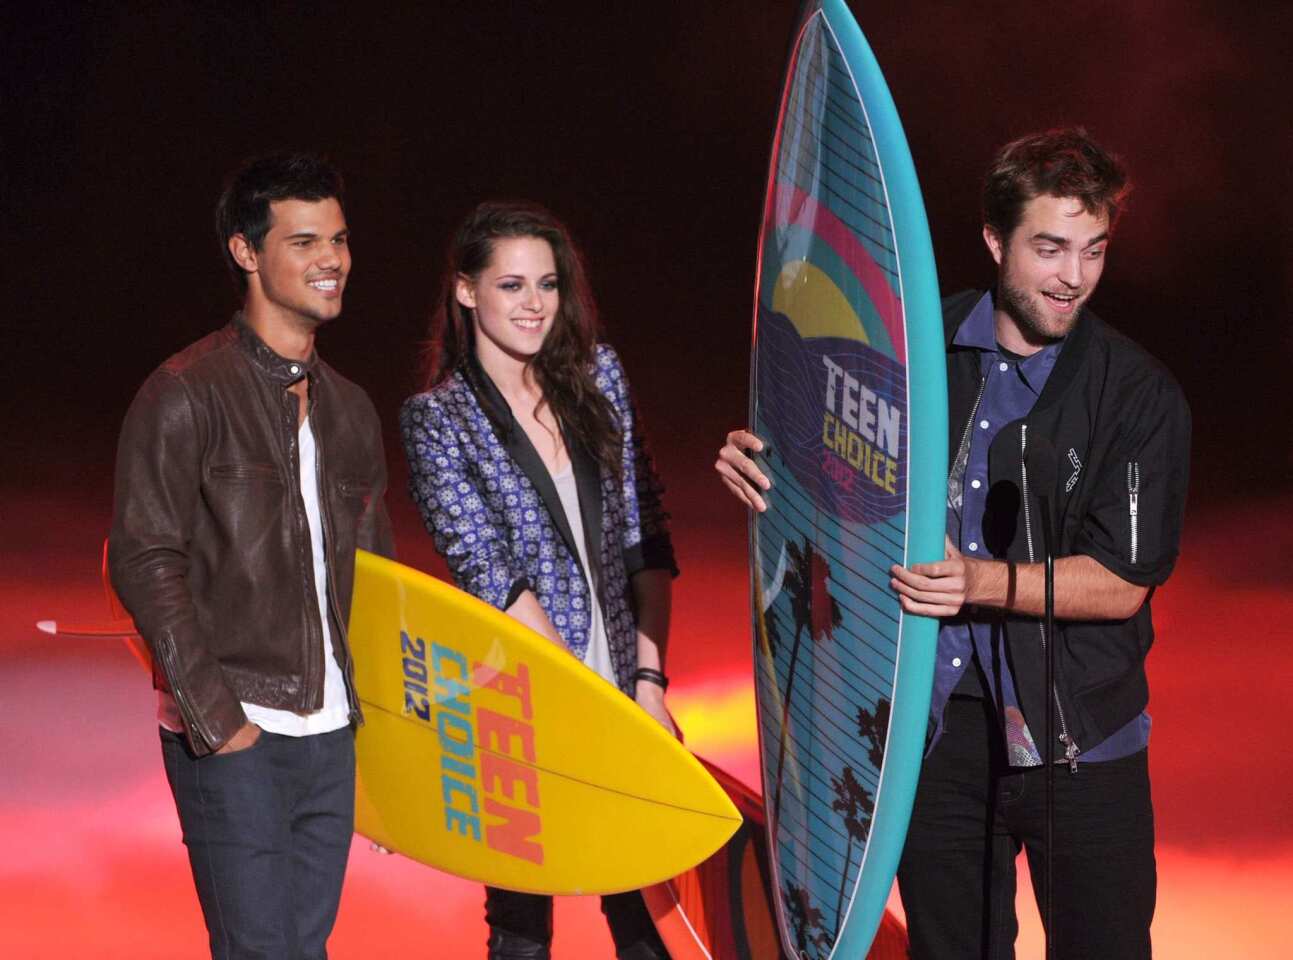 "The Twilight Saga" continues its long road to retirement as Taylor, Kristen and Robert appear at the 2012 Teen Choice awards to collect trophies. Two days after the ceremony, Stewart's romantic outing with "Snow White and The Huntsman" director Rupert Sanders would be revealed.